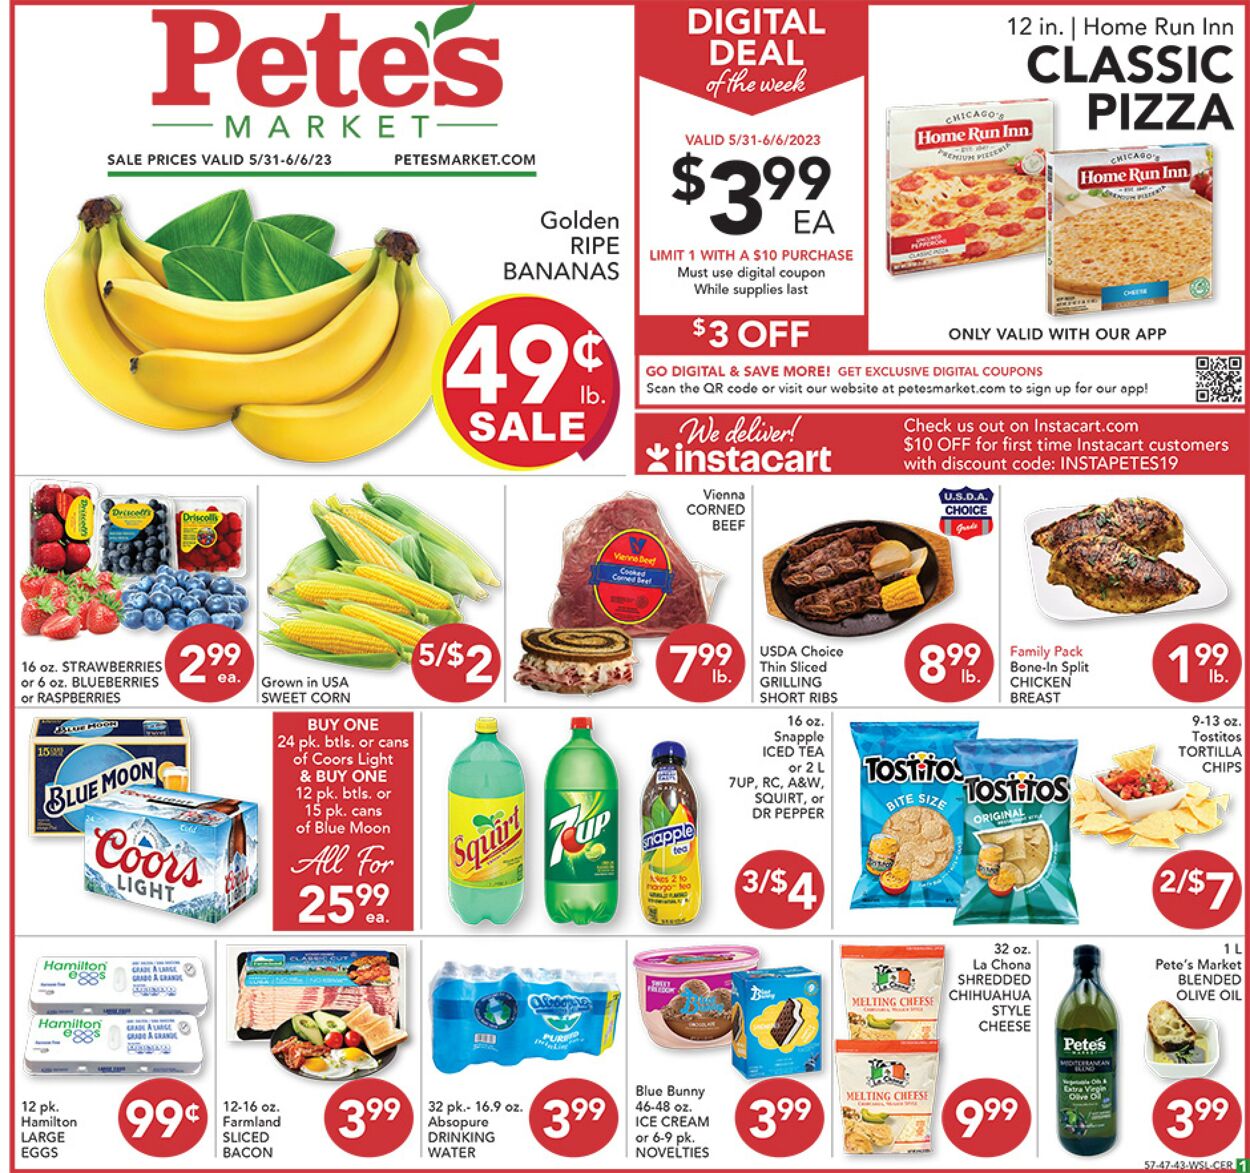 Pete's Fresh Market Promotional weekly ads